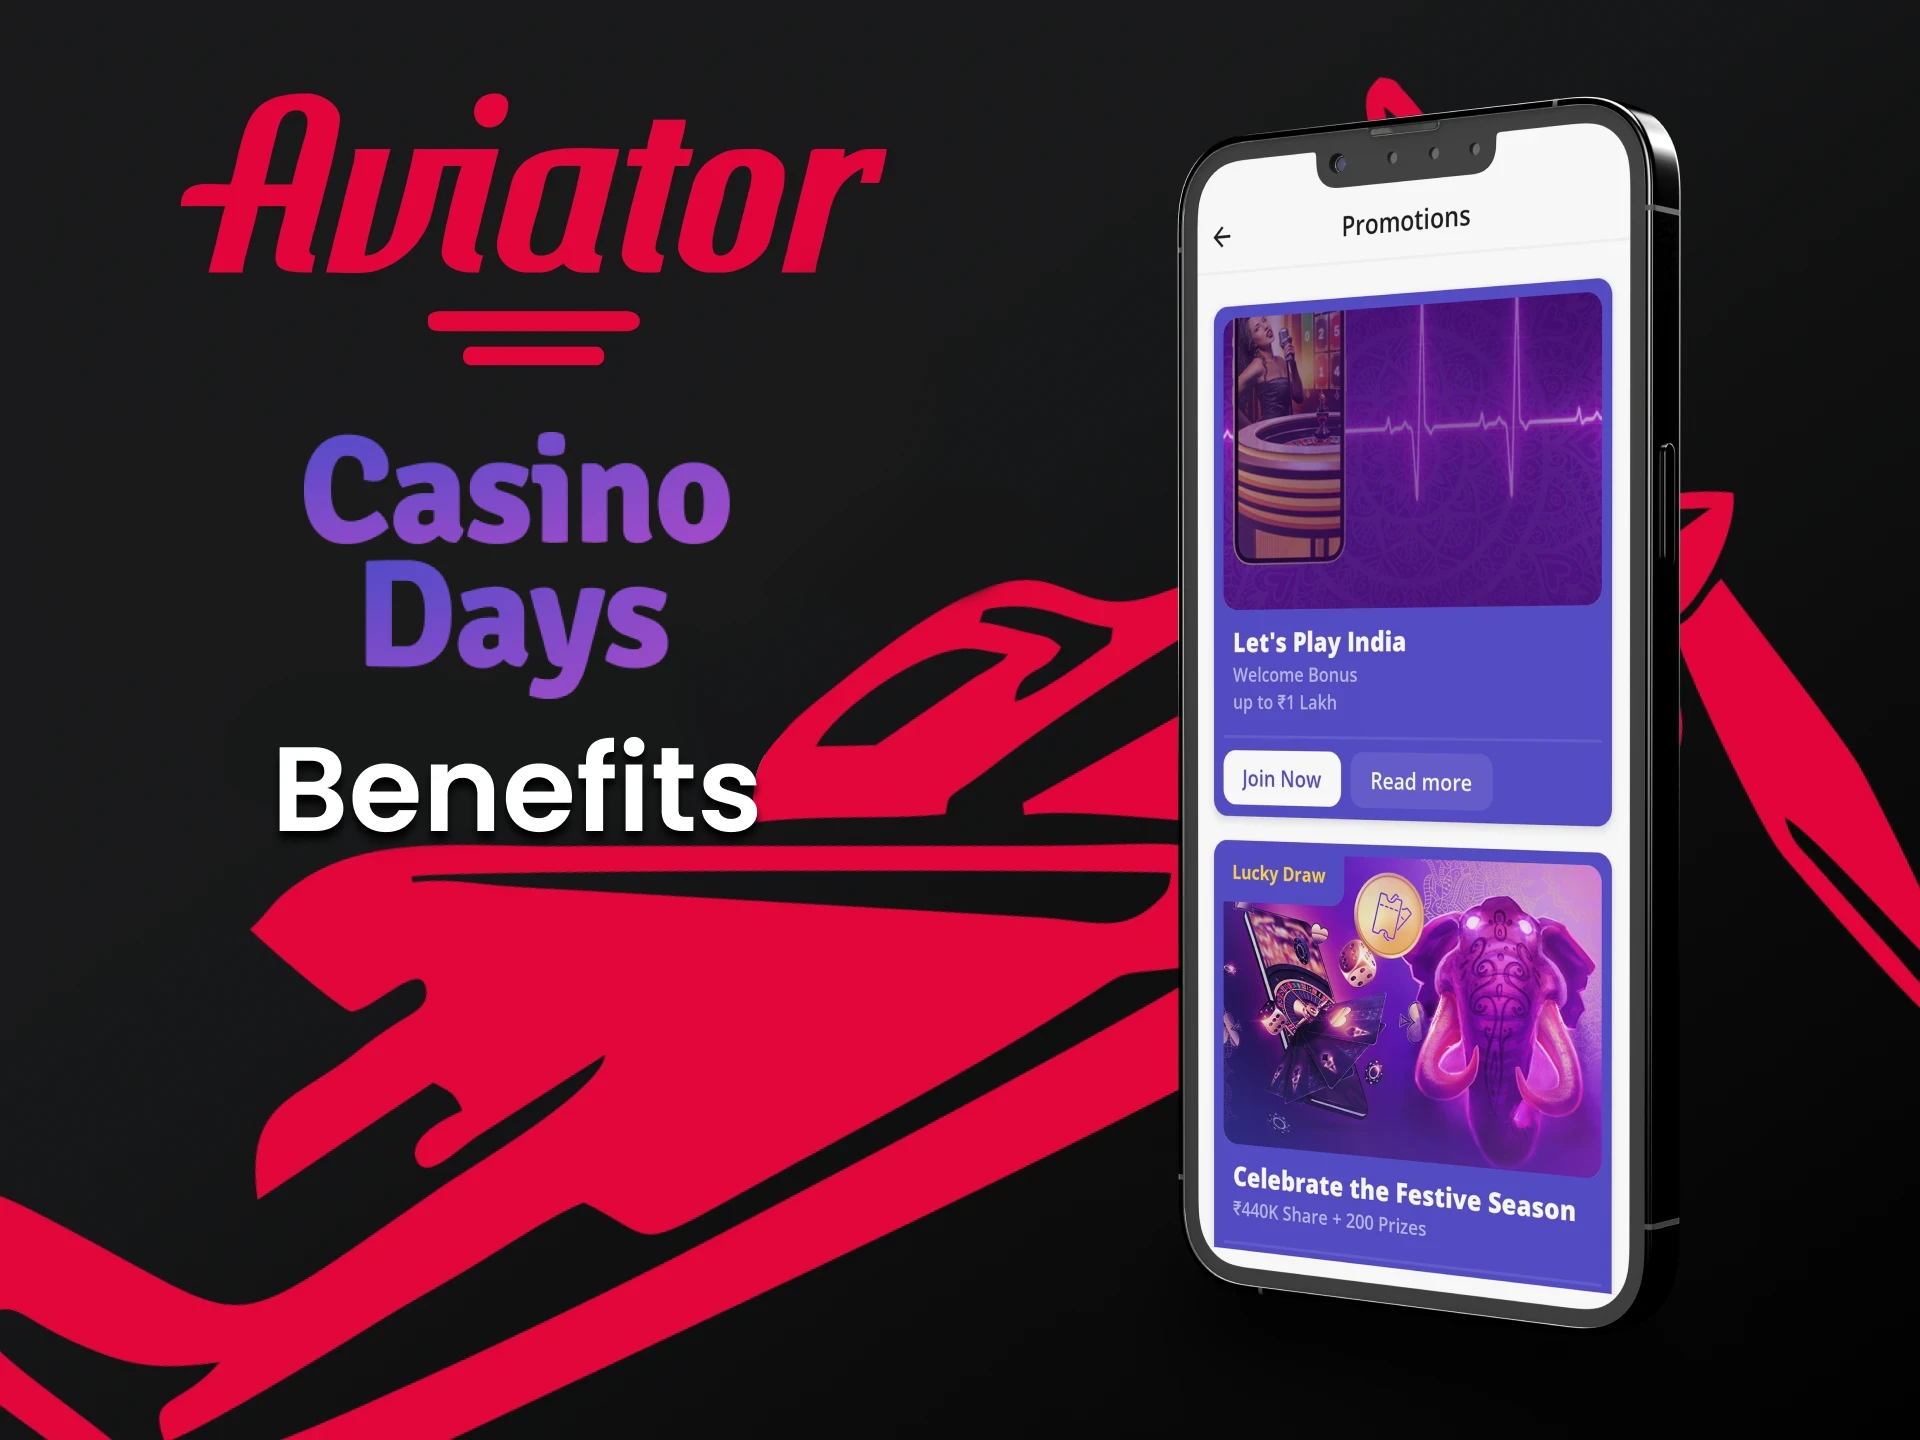 The Casino Days app has many advantages and bonuses for playing Aviator.